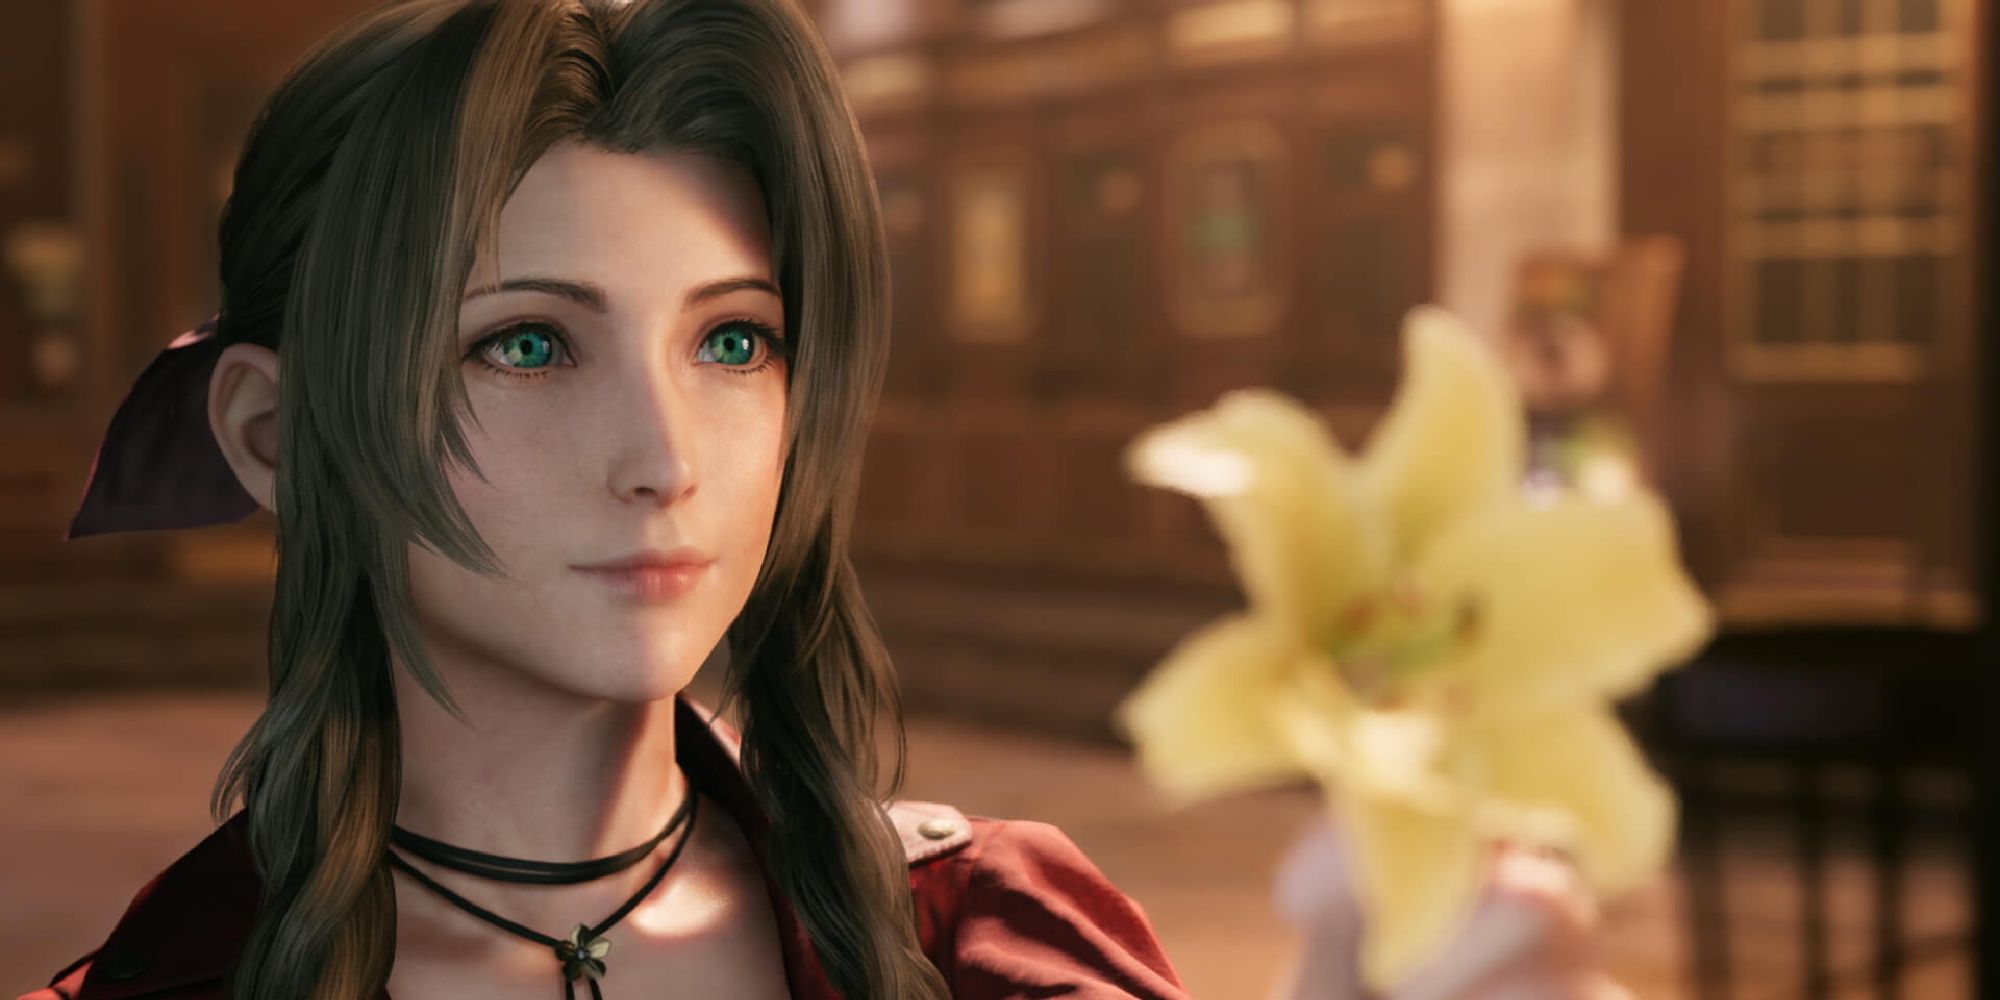 Aerith from Final Fantasy 7, offering a white lily to someone off-screen